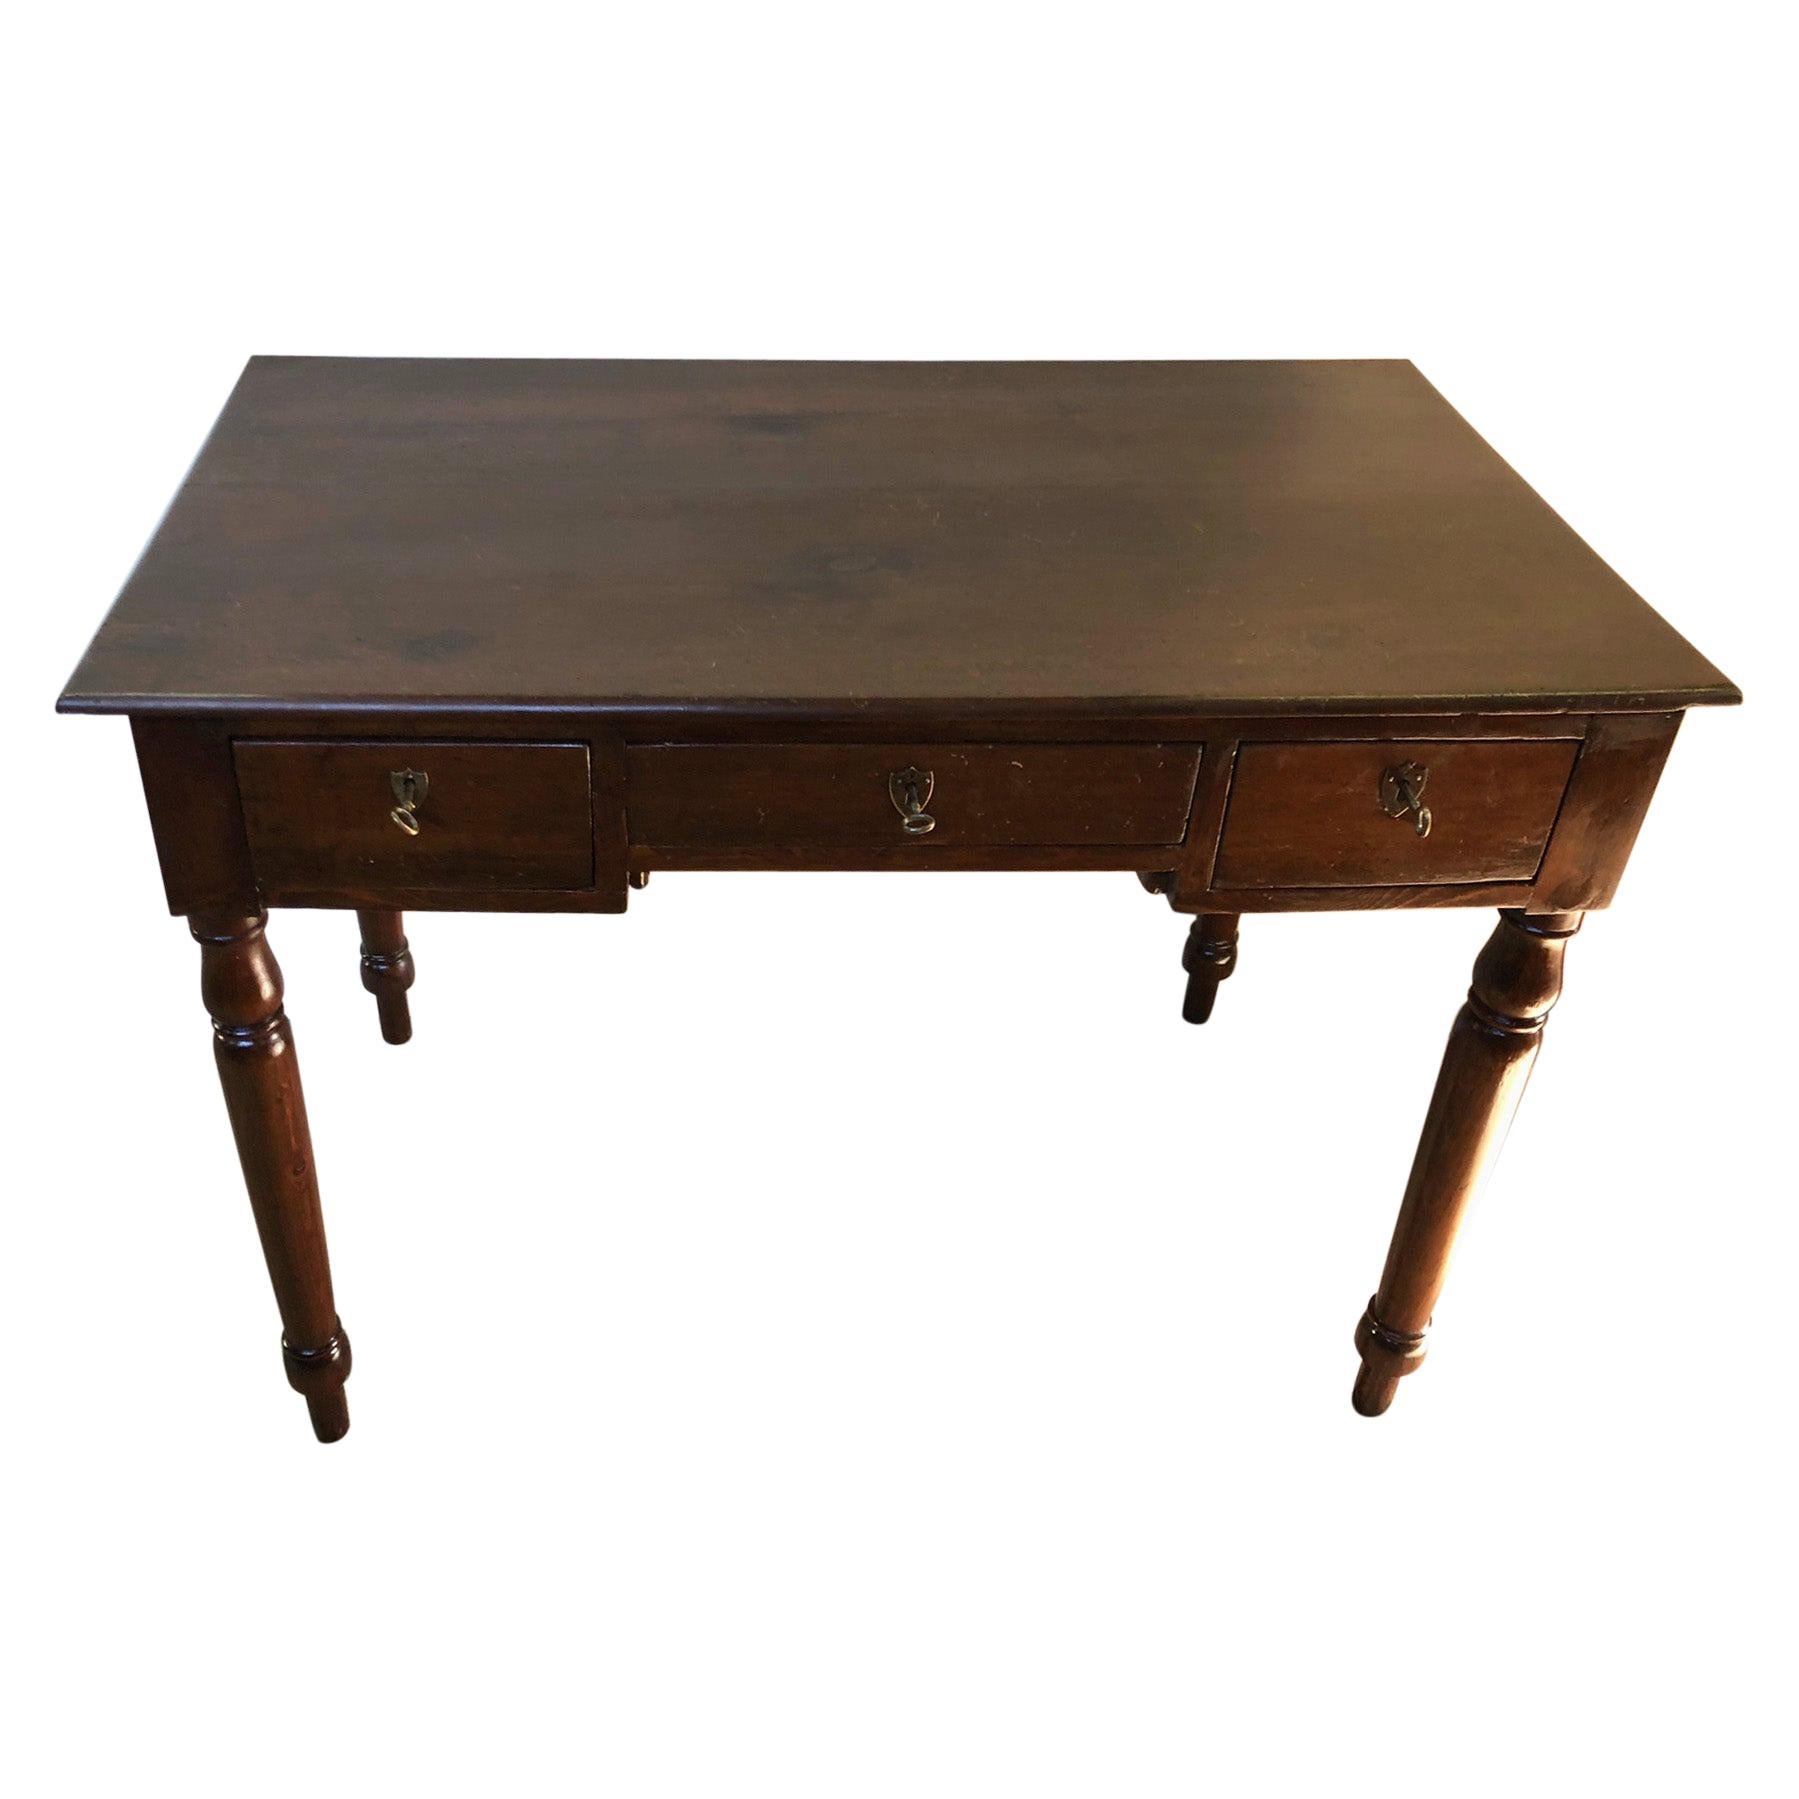 Original Italian Desk in Walnut and Fir, with Three Drawers, Turned Leg For Sale